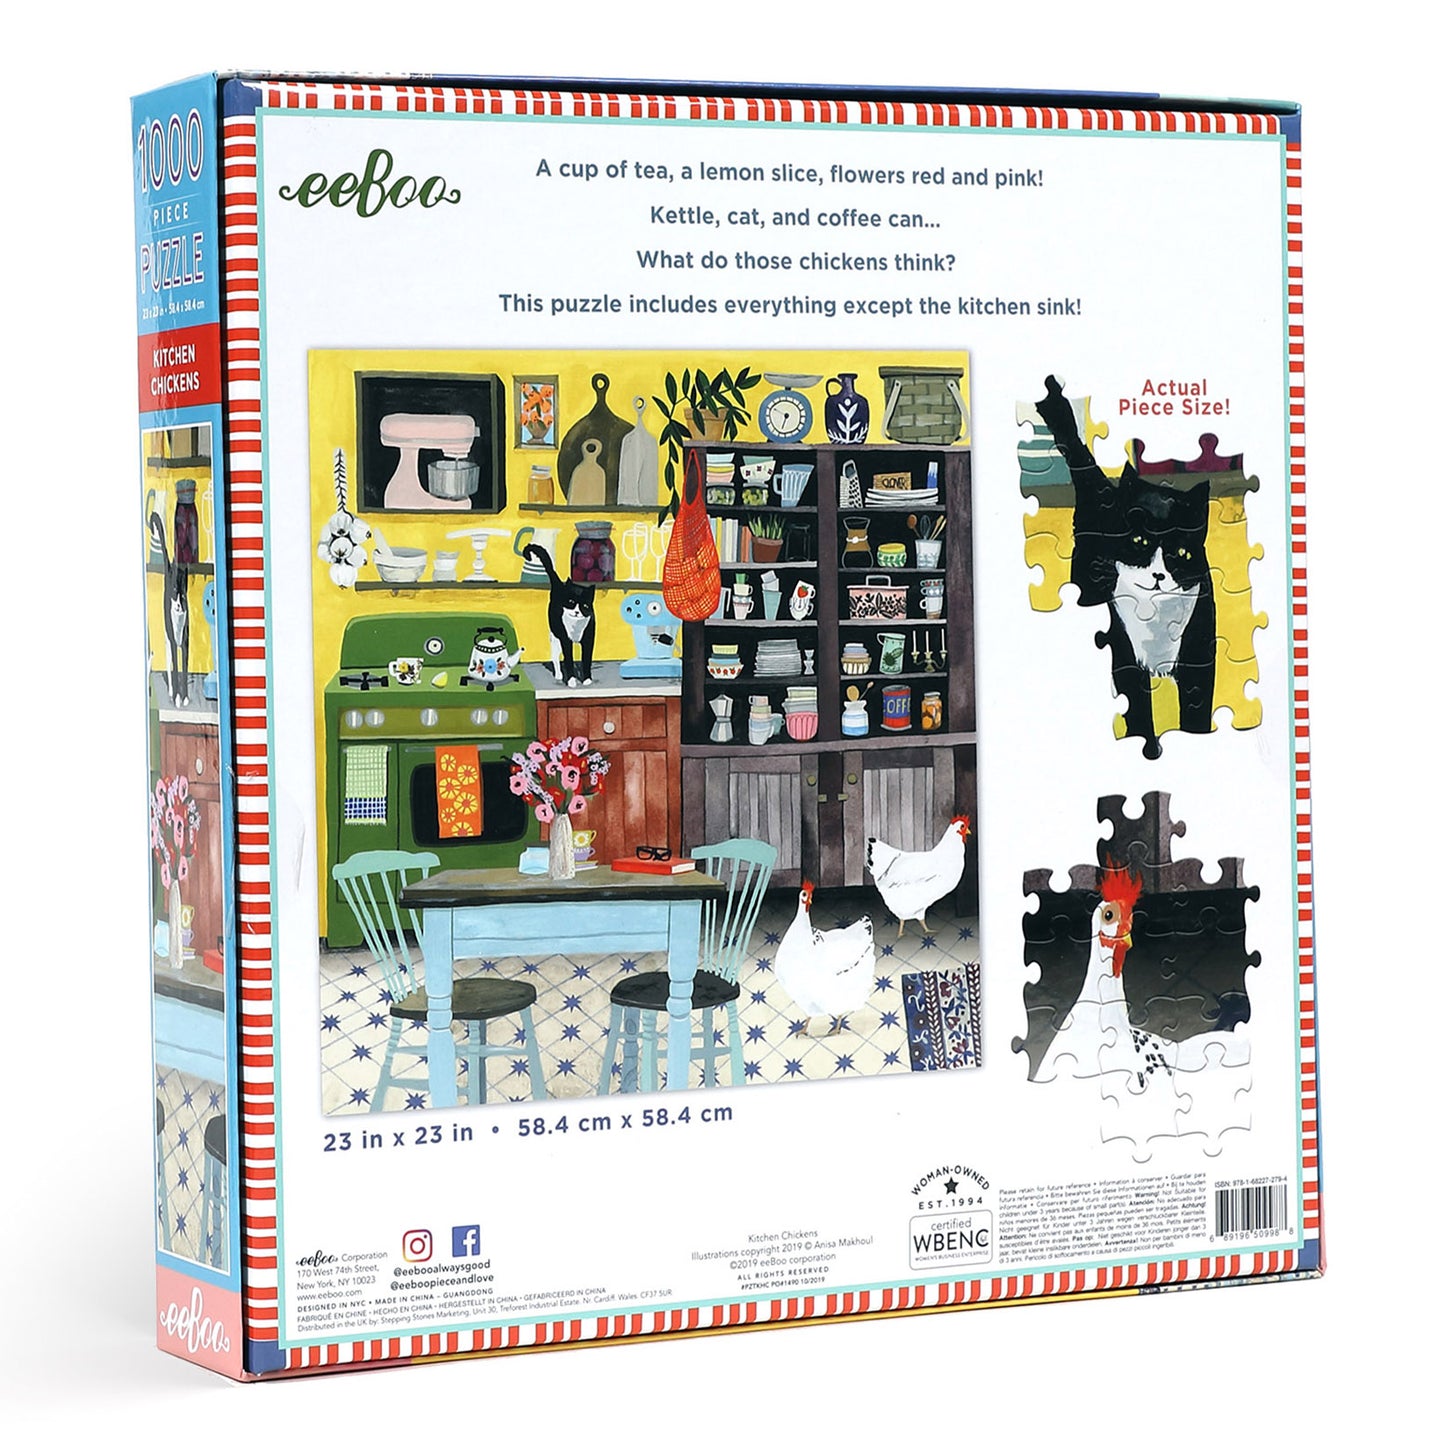 Kitchen Chickens and Cat 1000 Piece Jigsaw Puzzle | eeBoo Piece & Love | Farmhouse Nostalgia Gift